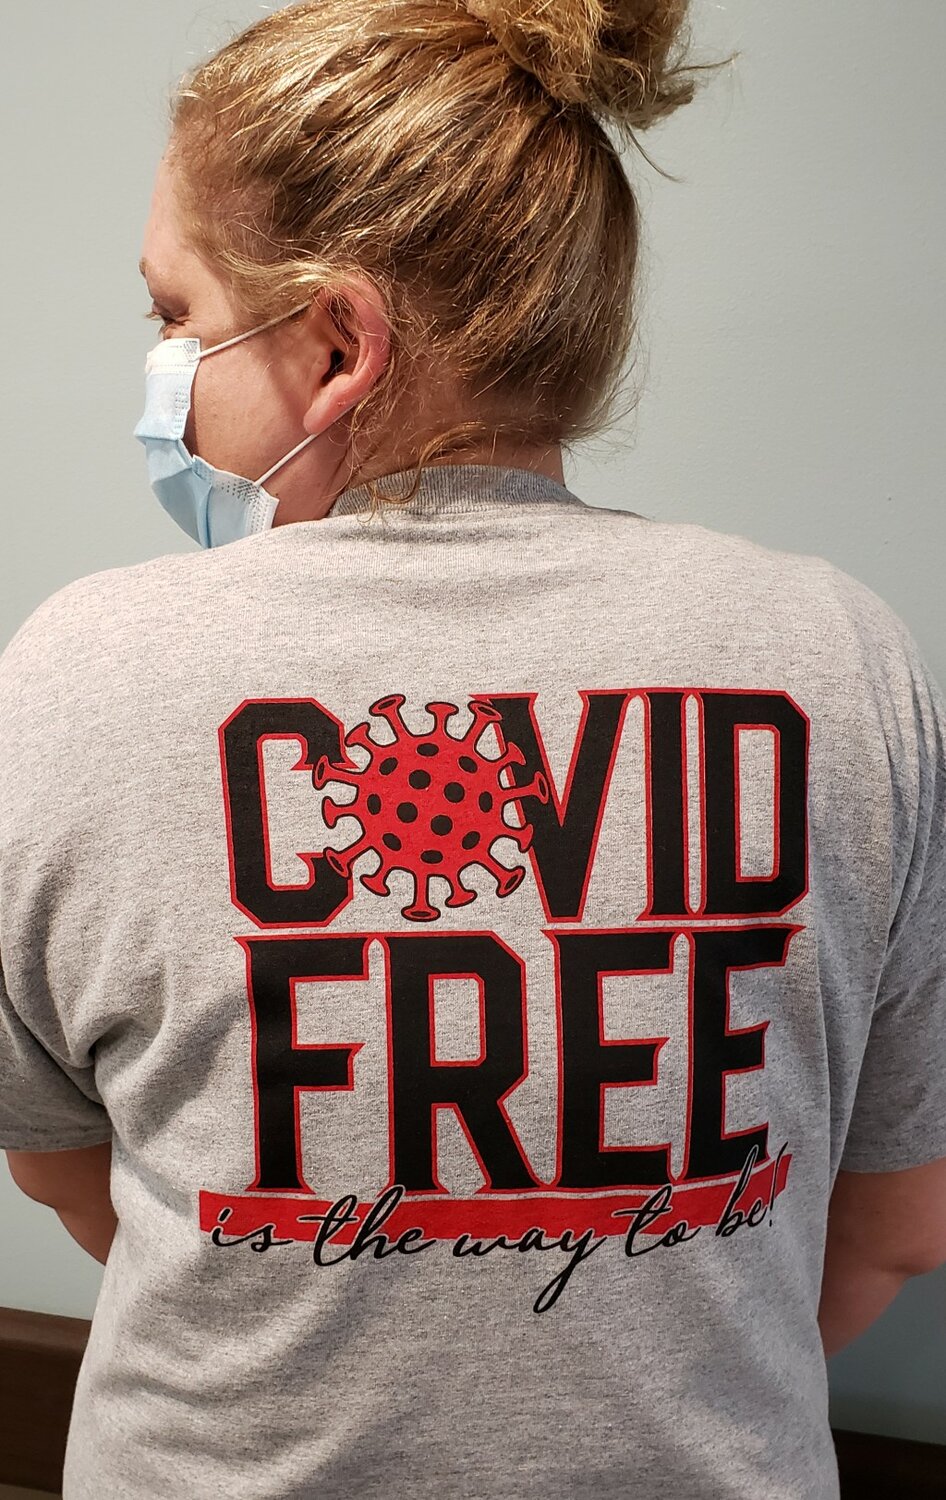 Jamie Faber, a CNA shower assistant at the Franklin Grove Living and Rehabilitation Center, shows off the back of the t-shirt that reads “Covid Free is the way to be.”